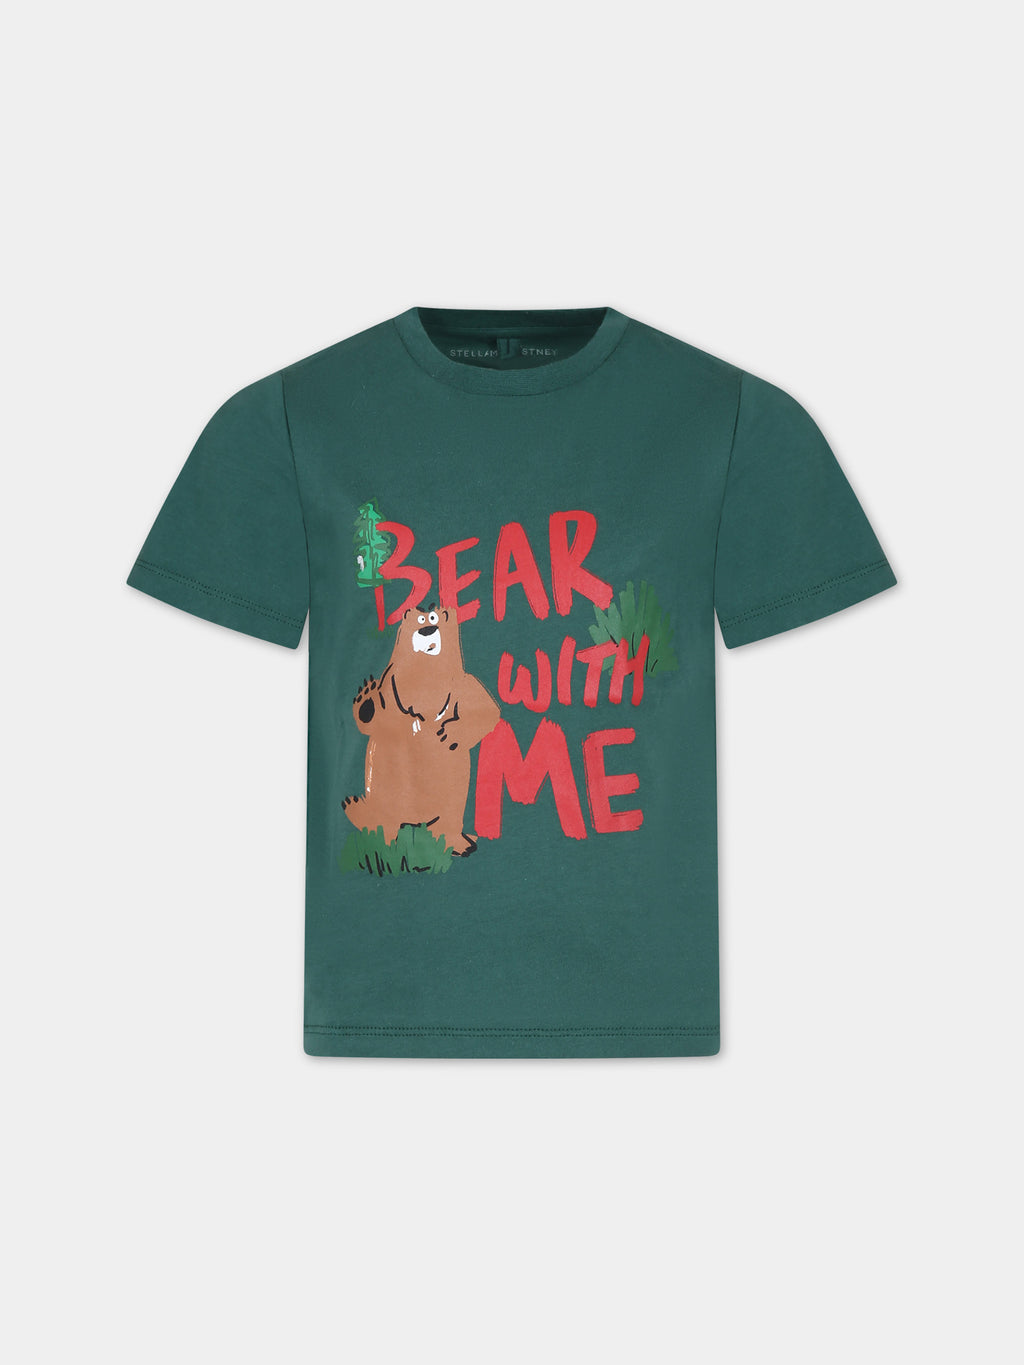 Green t-shirt for boy with bear print and writing